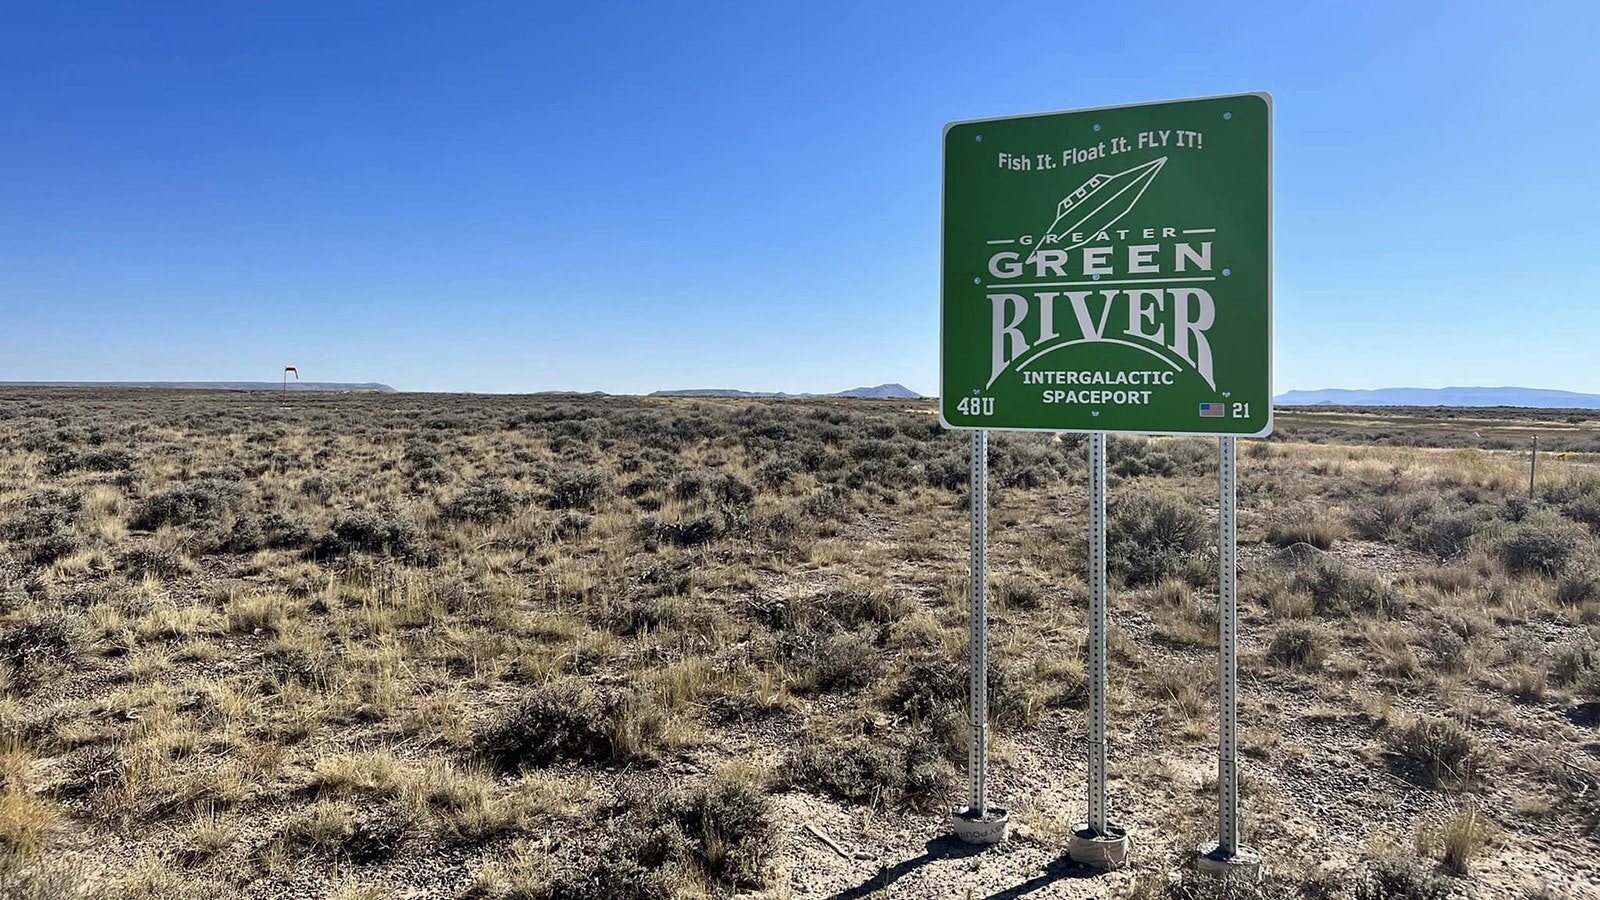 A sign features a spacecraft coming in for a landing in Green River.